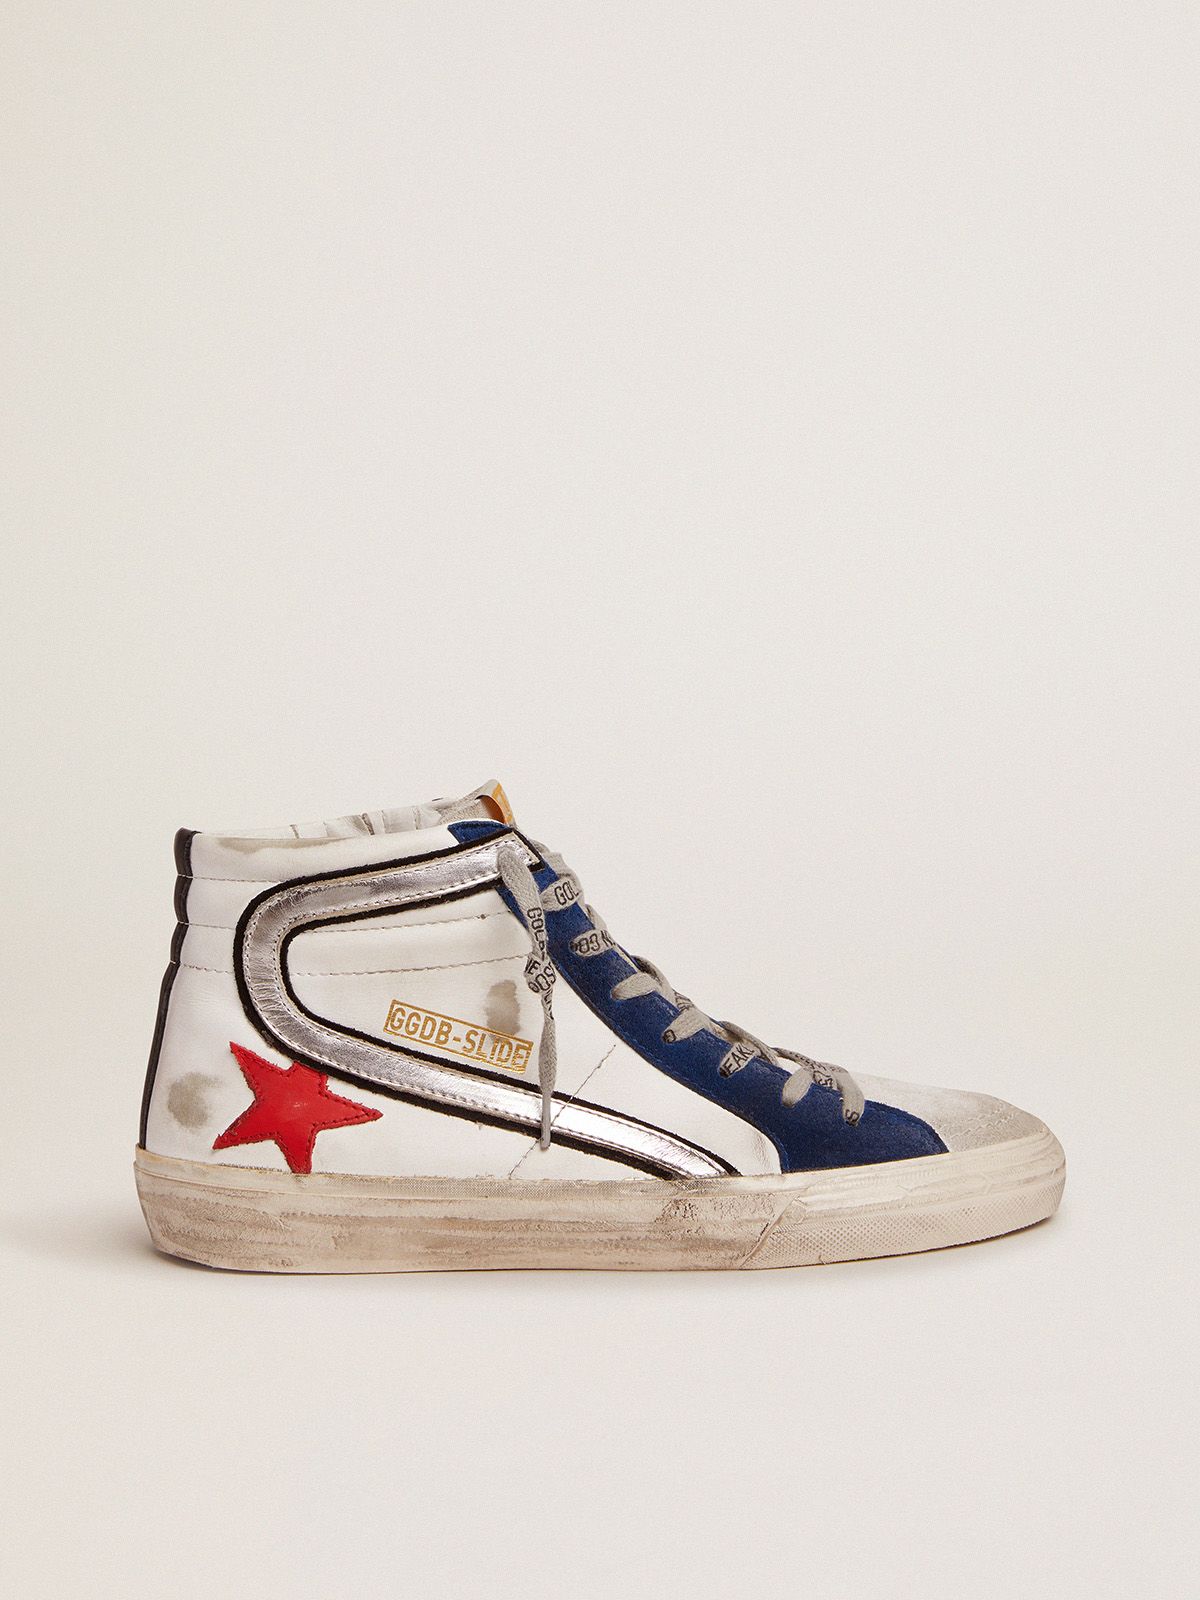 Slide sneakers in white leather with red leather star